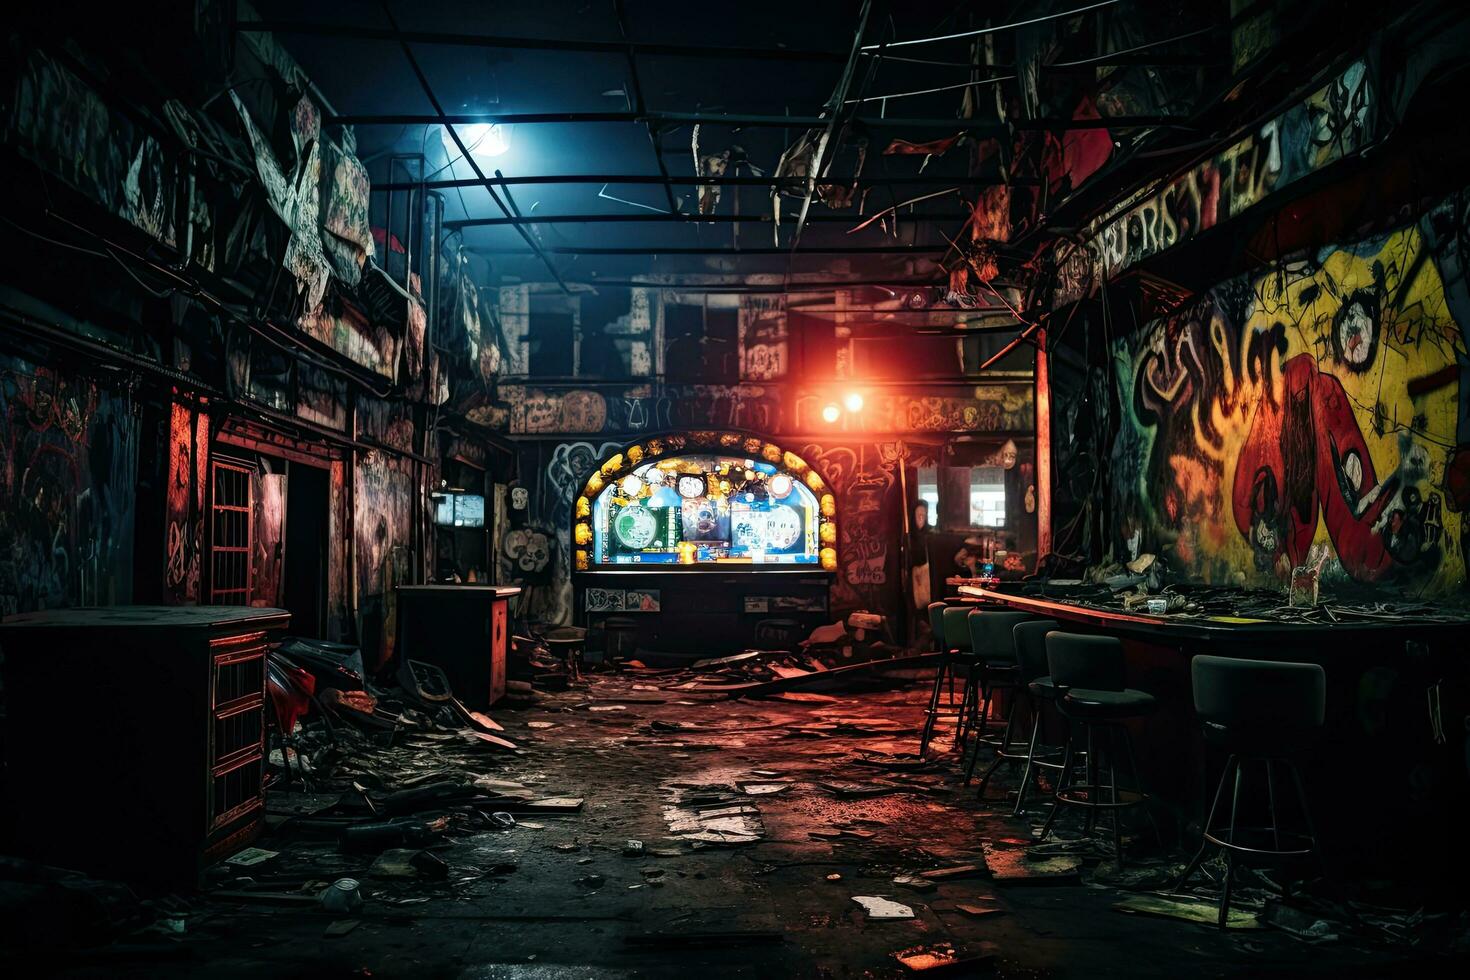 Abandoned factory interior at night with neon lights and graffiti. A vivid haunting image of an abandoned nightclub. Dark, graffiti-covered walls frame the dimly lit space, AI Generated photo